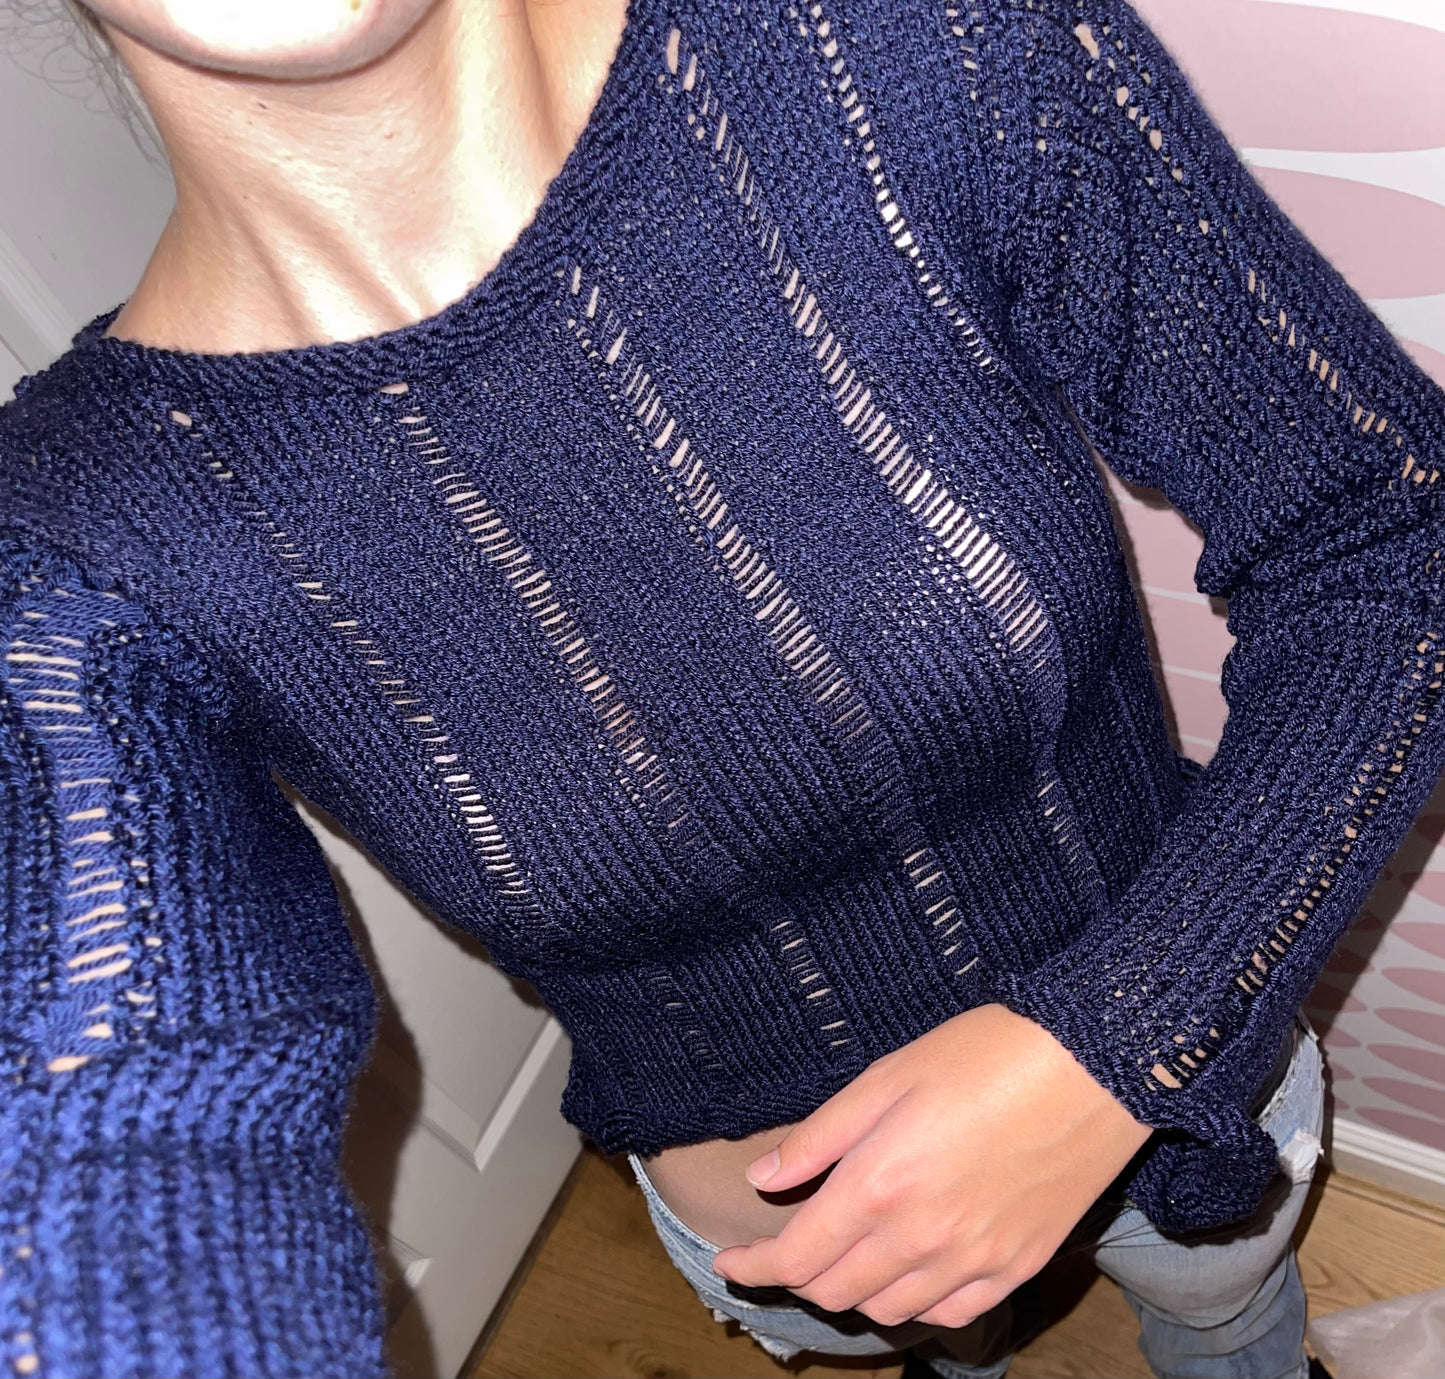 Handmade navy blue distressed knitted jumper